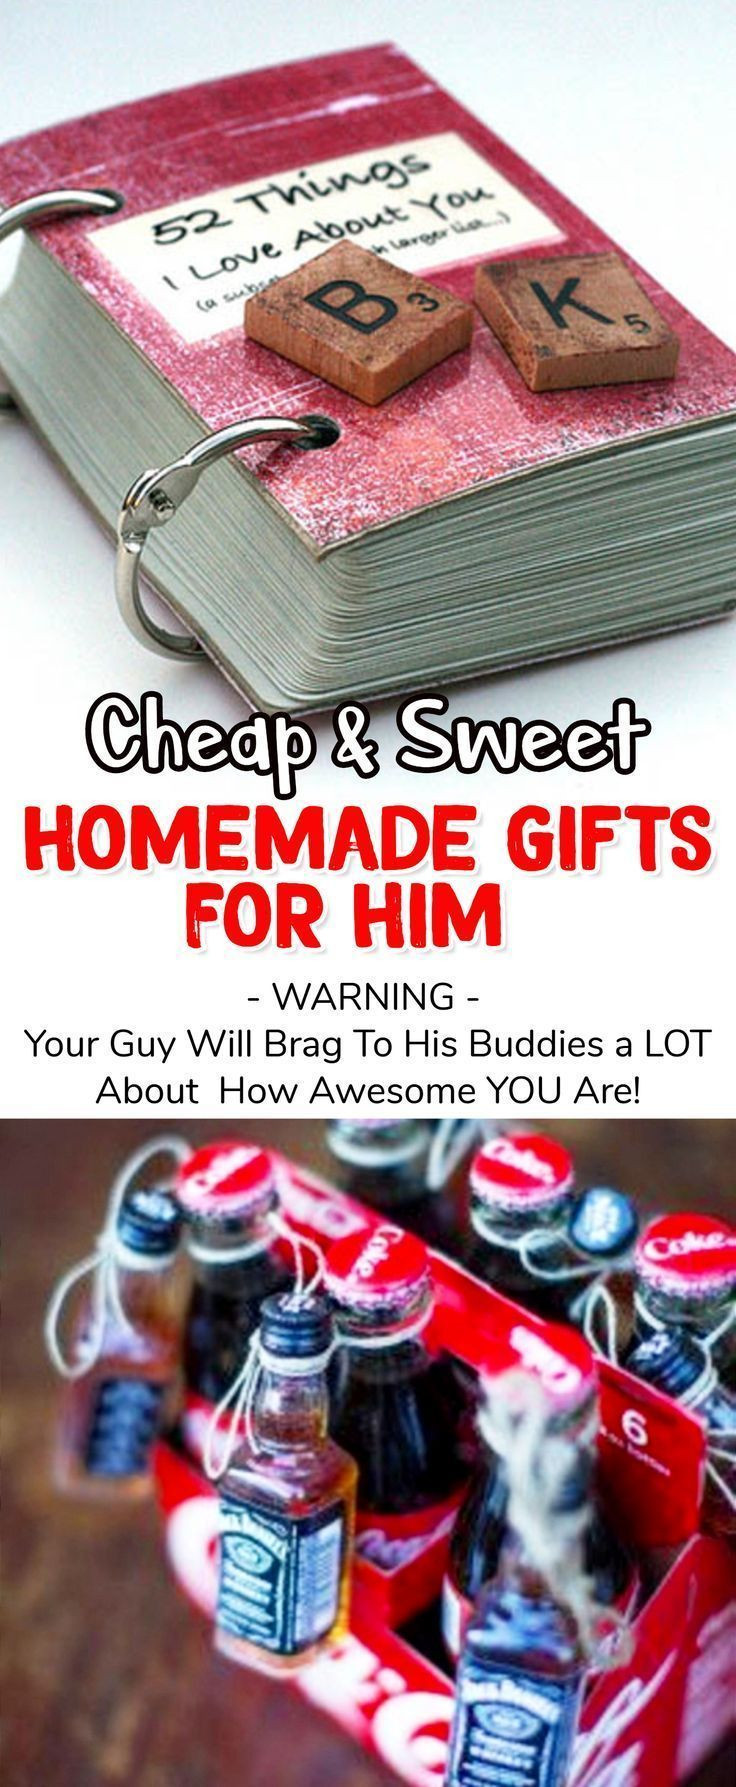 Homemade Birthday Gifts For Him
 26 Handmade Gift Ideas For Him DIY Gifts He Will Love